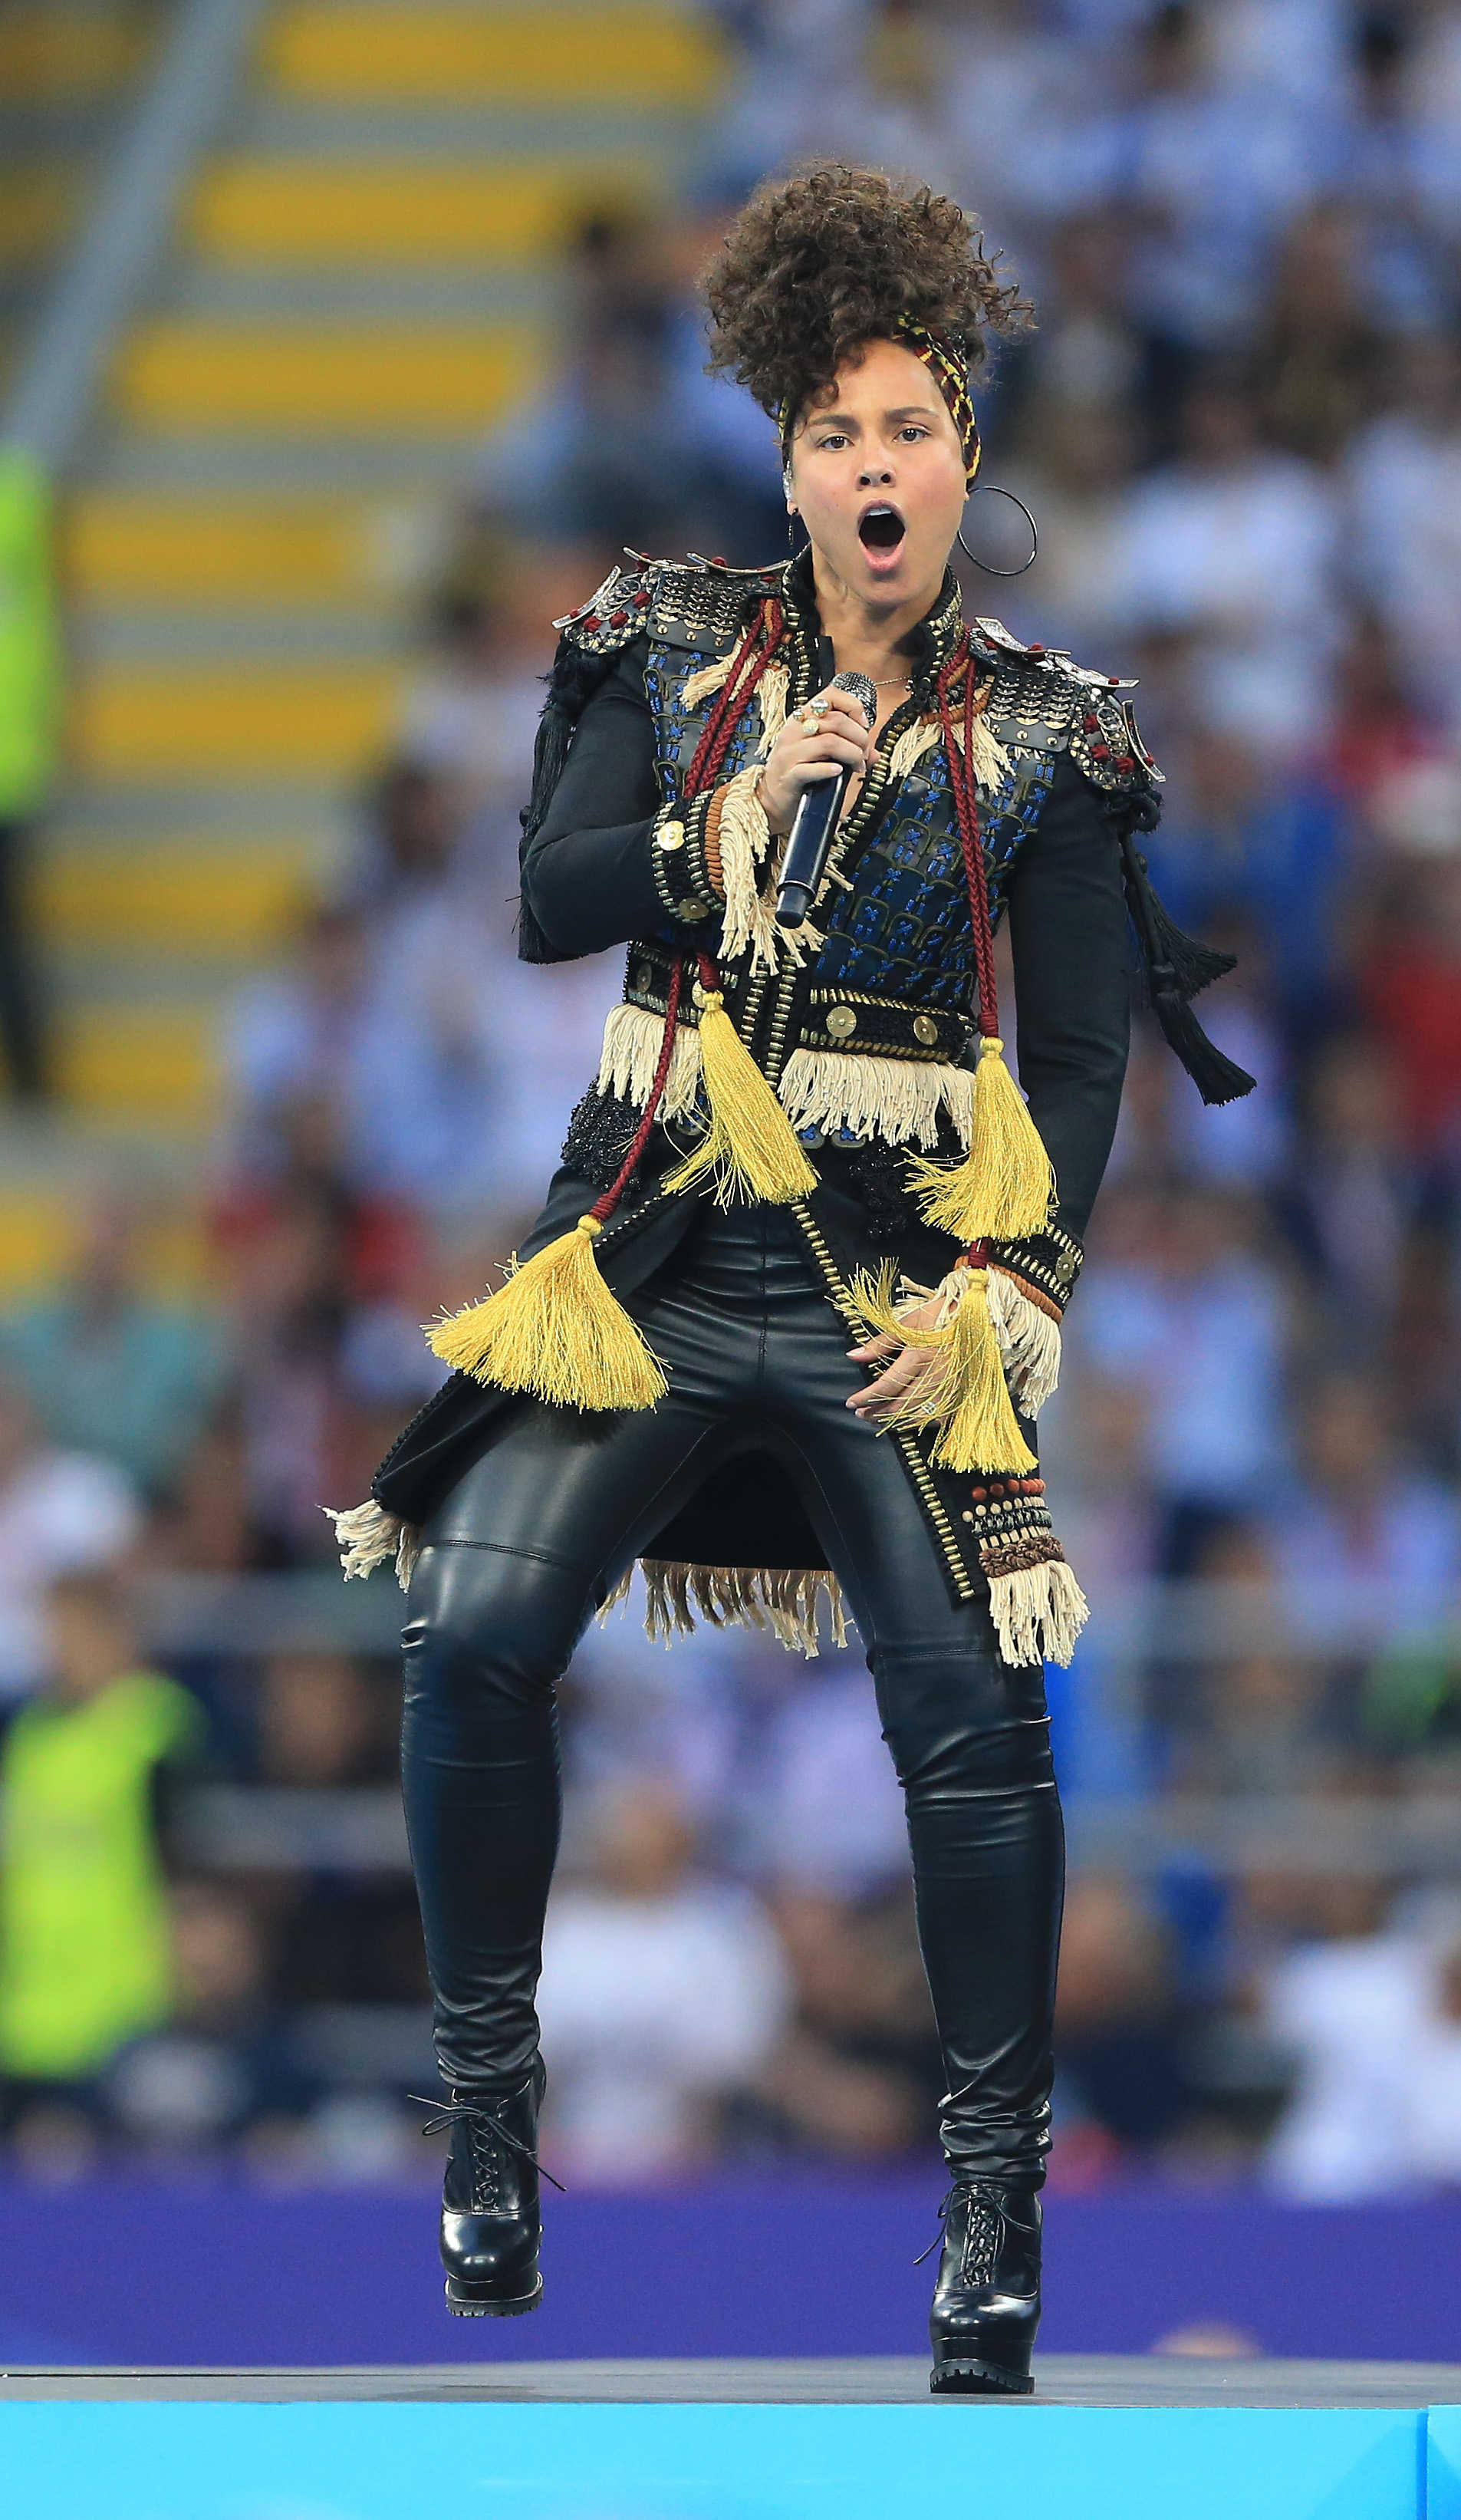 Alicia Keys performs at the UEFA Champions League Final